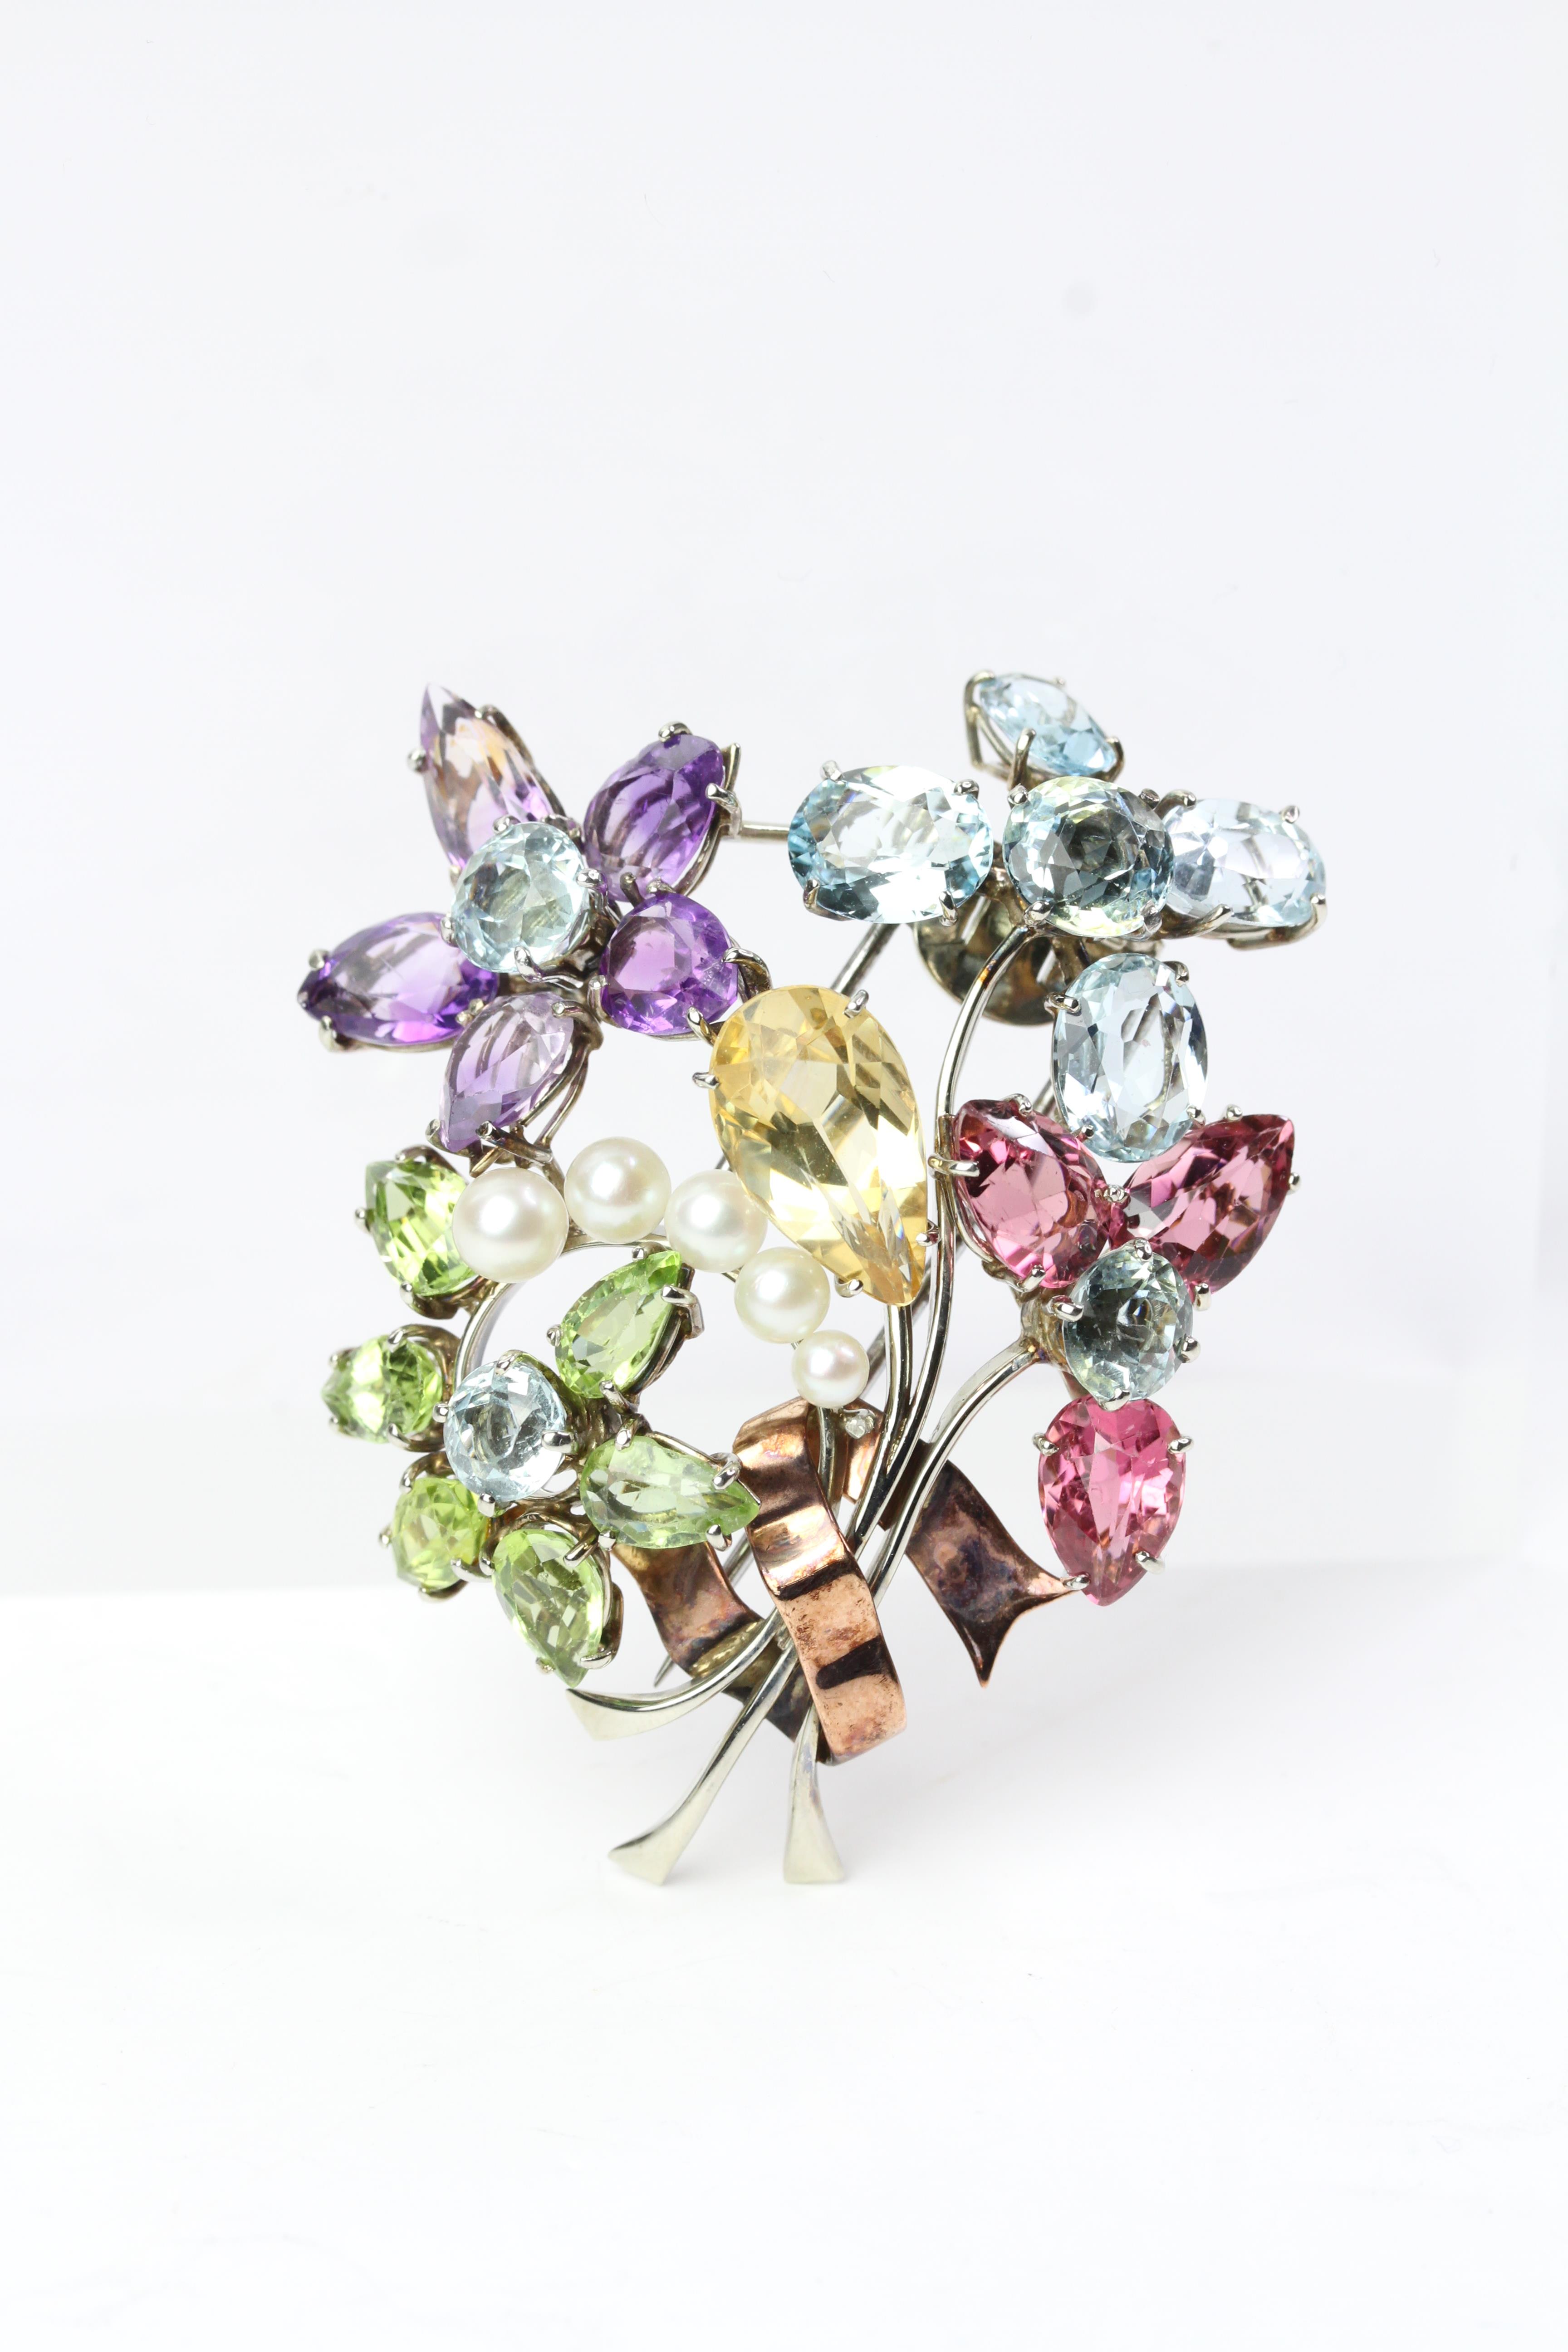 C1950 floral brooch with multi gemstones and pearls - Image 2 of 3